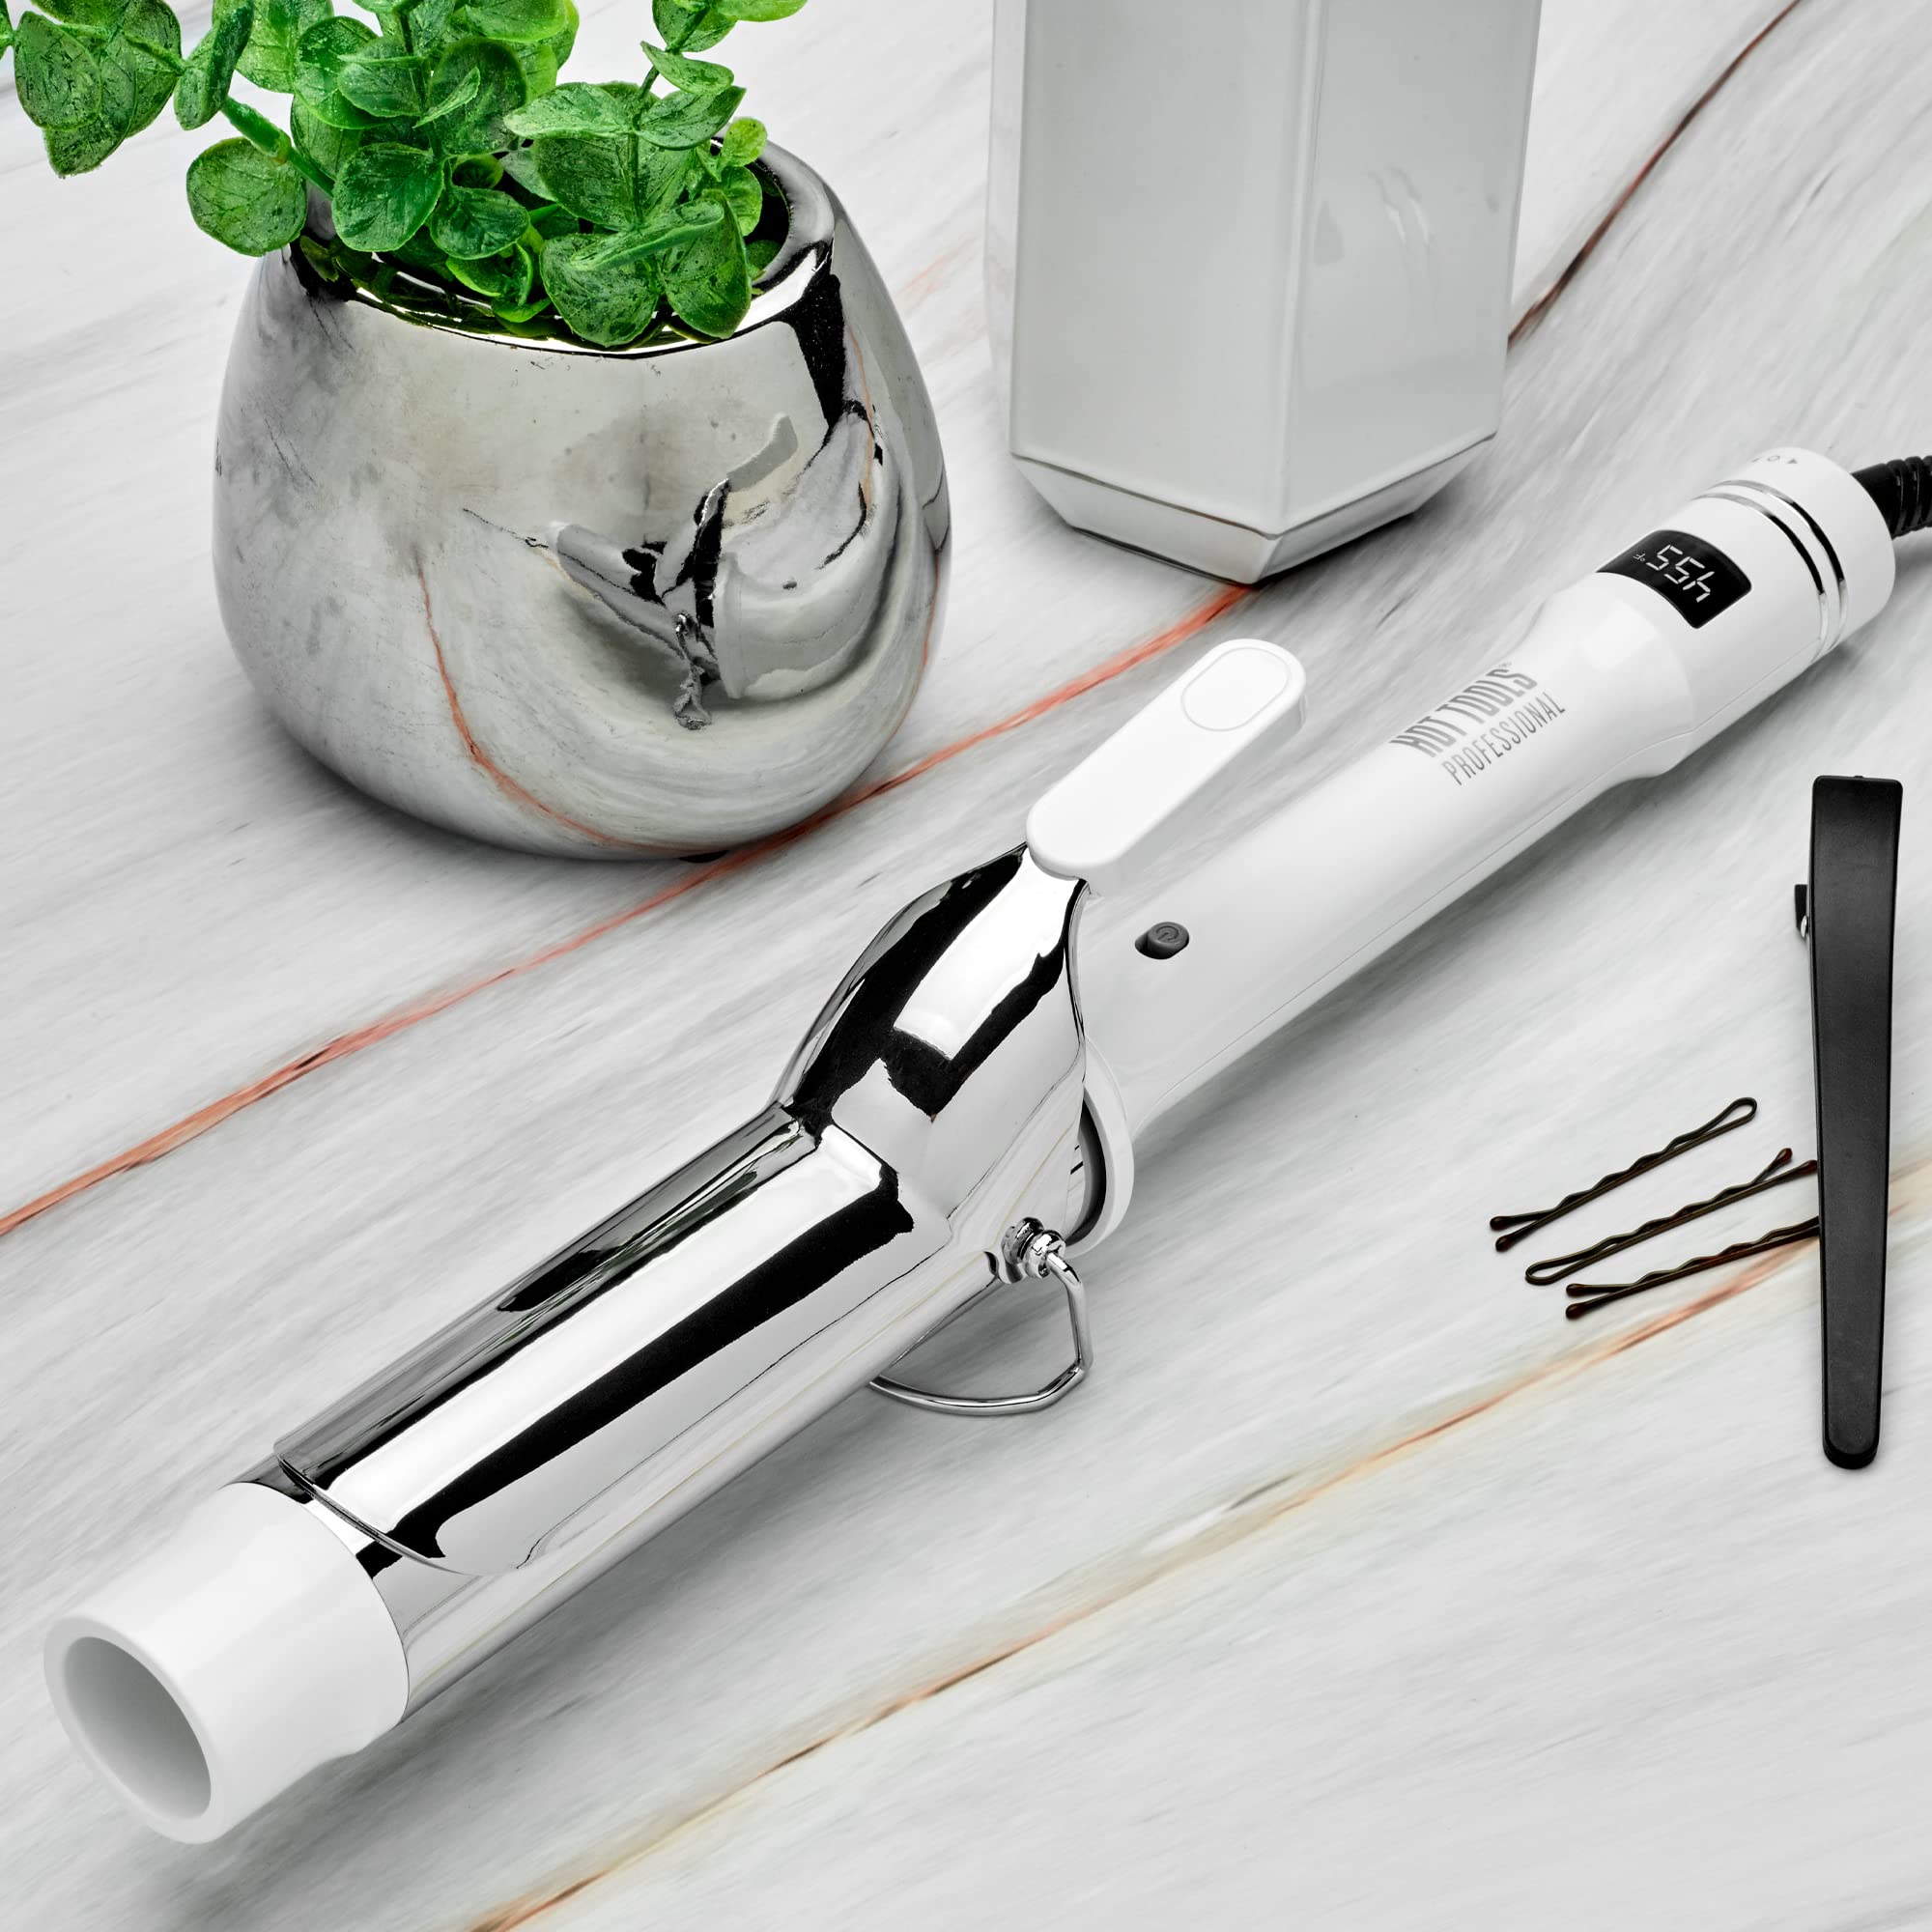 HOT TOOLS Pro Artist White Gold Digital Curling Iron, 1-1/2 inch